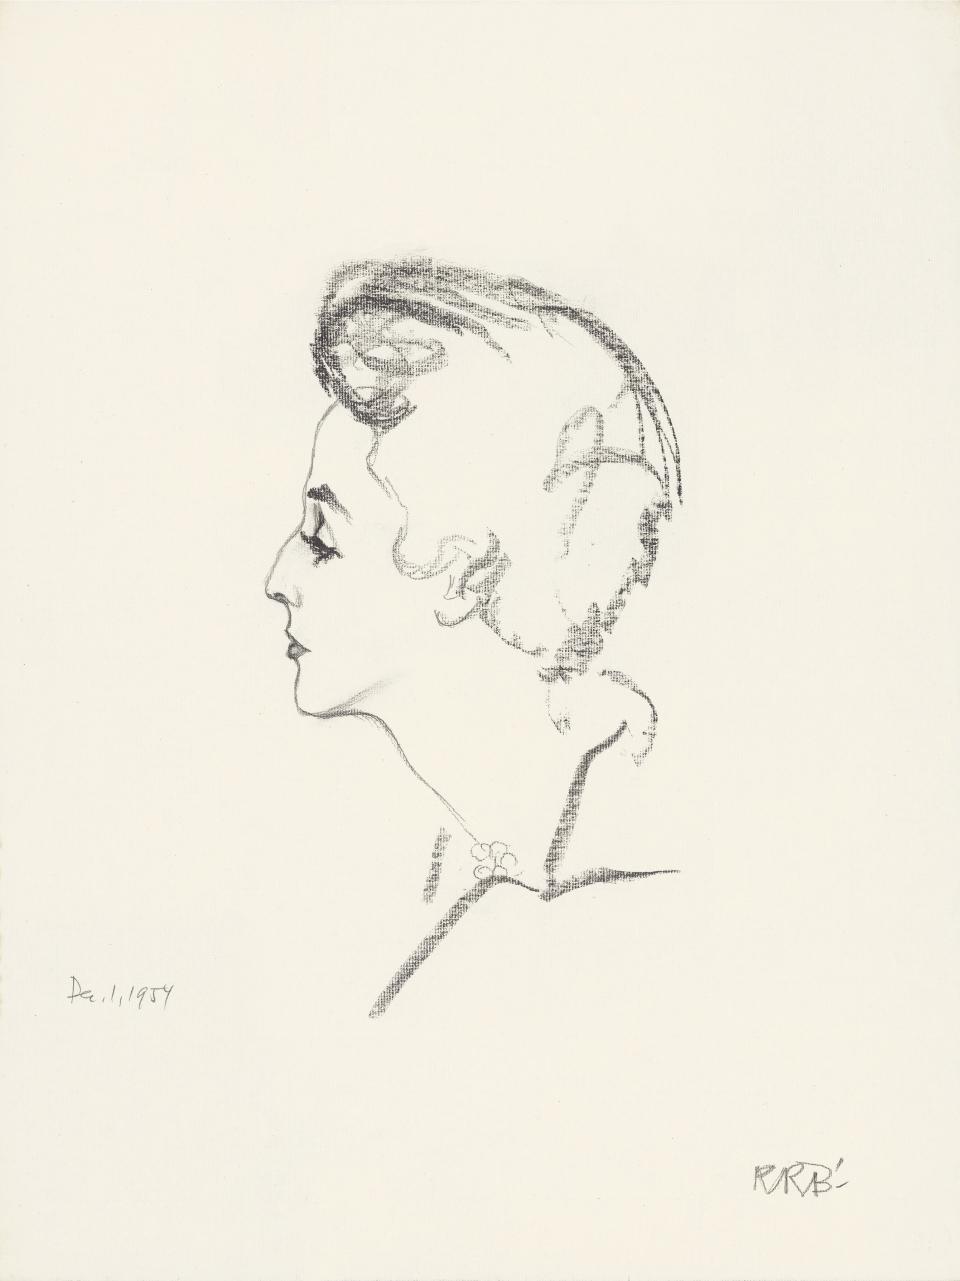 Baby Paley as sketched by René Bouché.